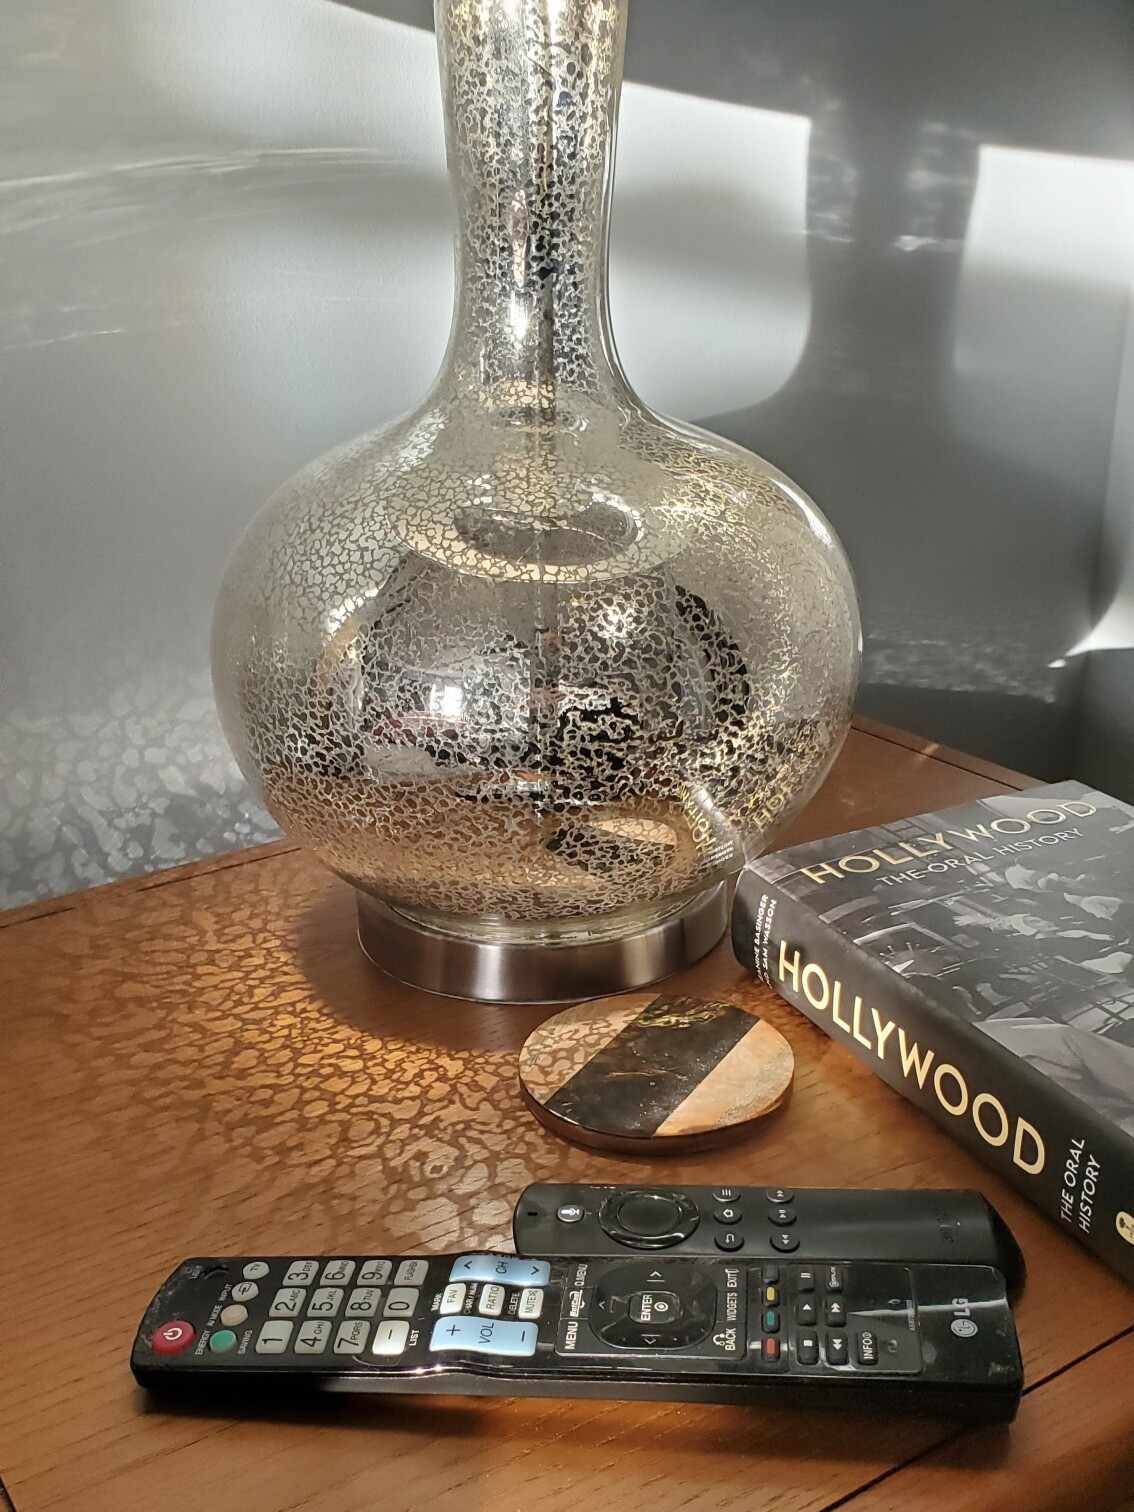 Hollywood book sits on bedside table next to lamp and tv remotes. Sunrise reflecting off the lamp in coral-like patterns